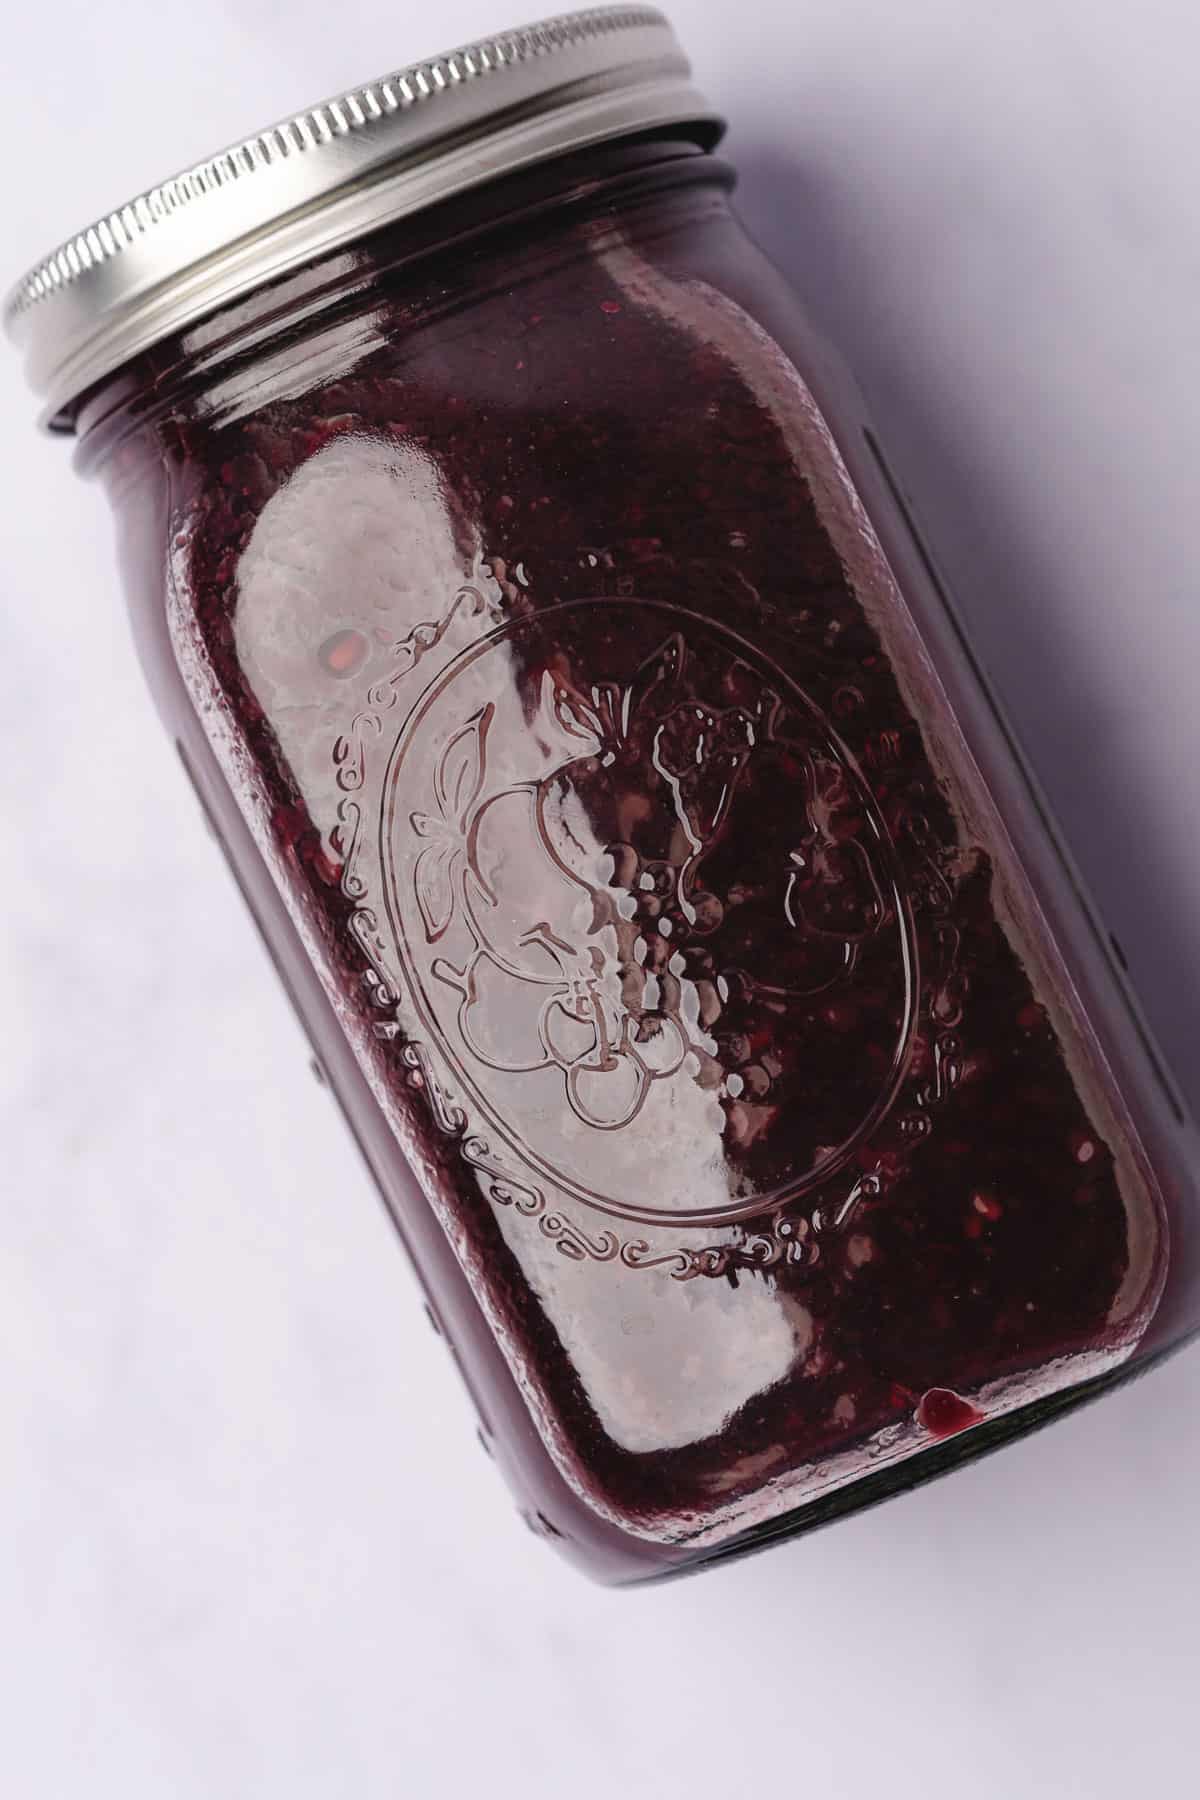 mashed blackberries and red wine in a mason jar